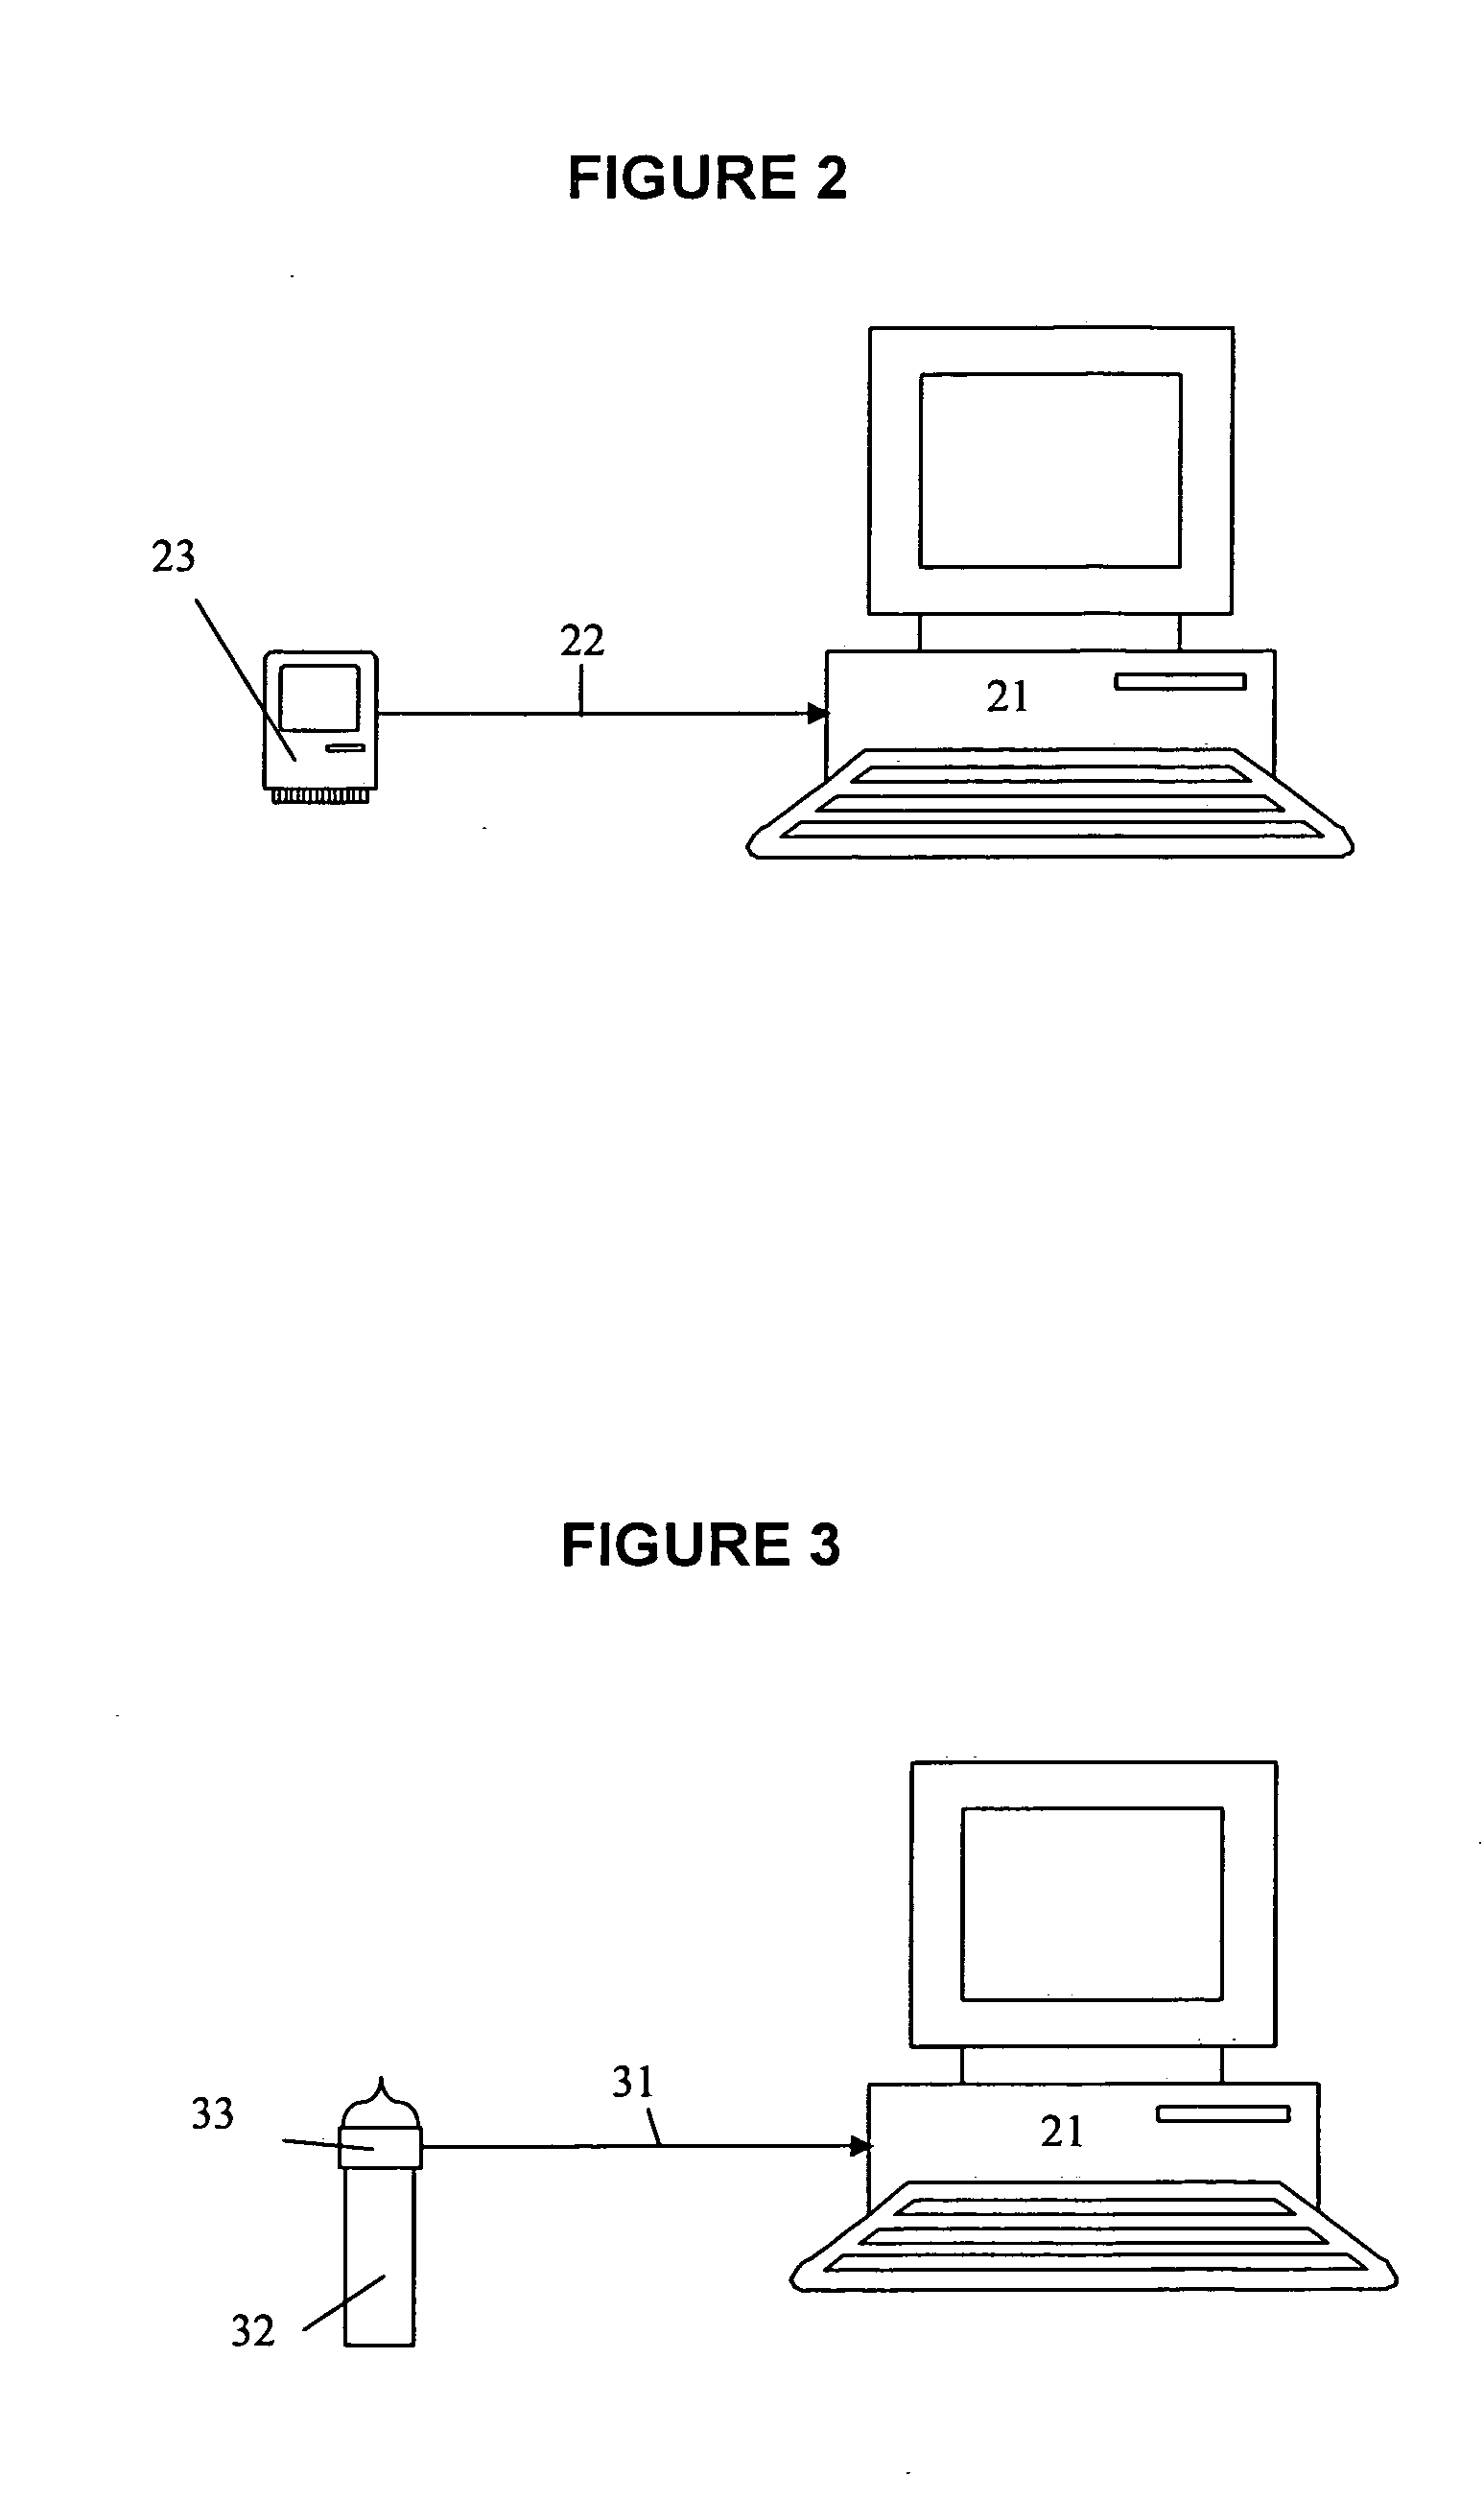 Method and system for evaluating feeding performance of individual neonates